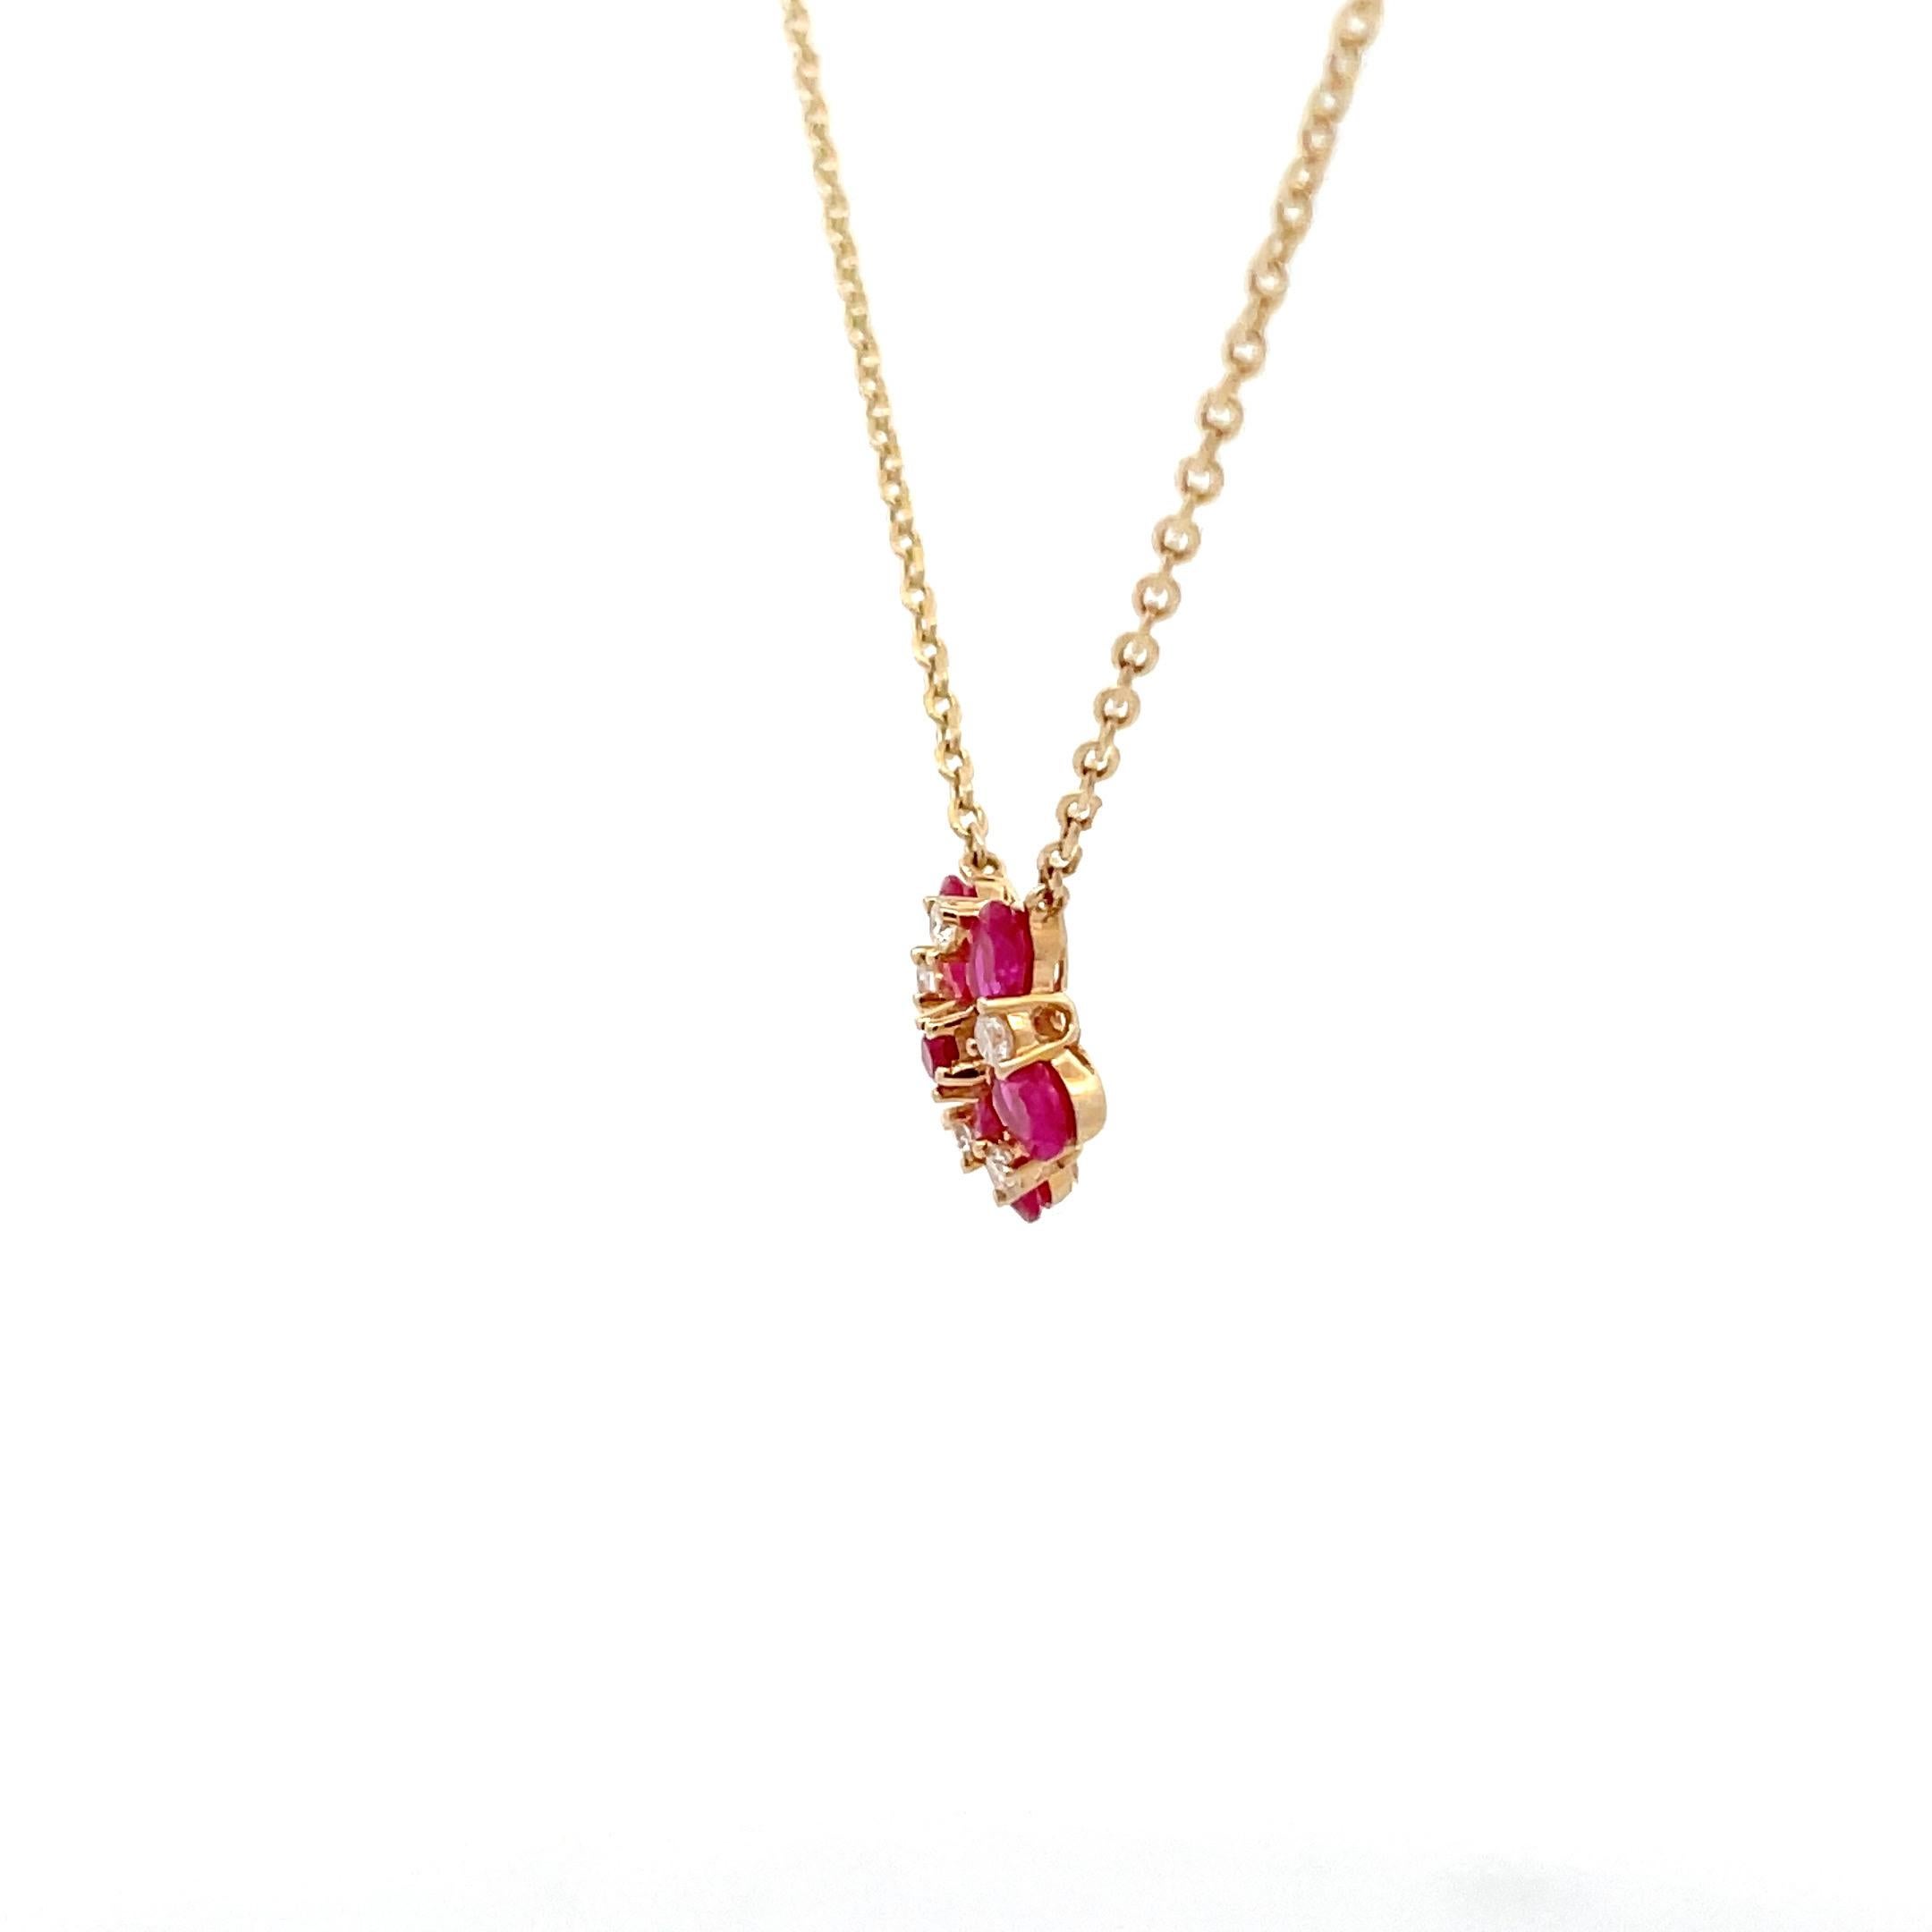 Oval Cut Ruby Diamond Floral Cluster Pendant Necklace 1.12 CTTW 14 Karat Yellow Gold 